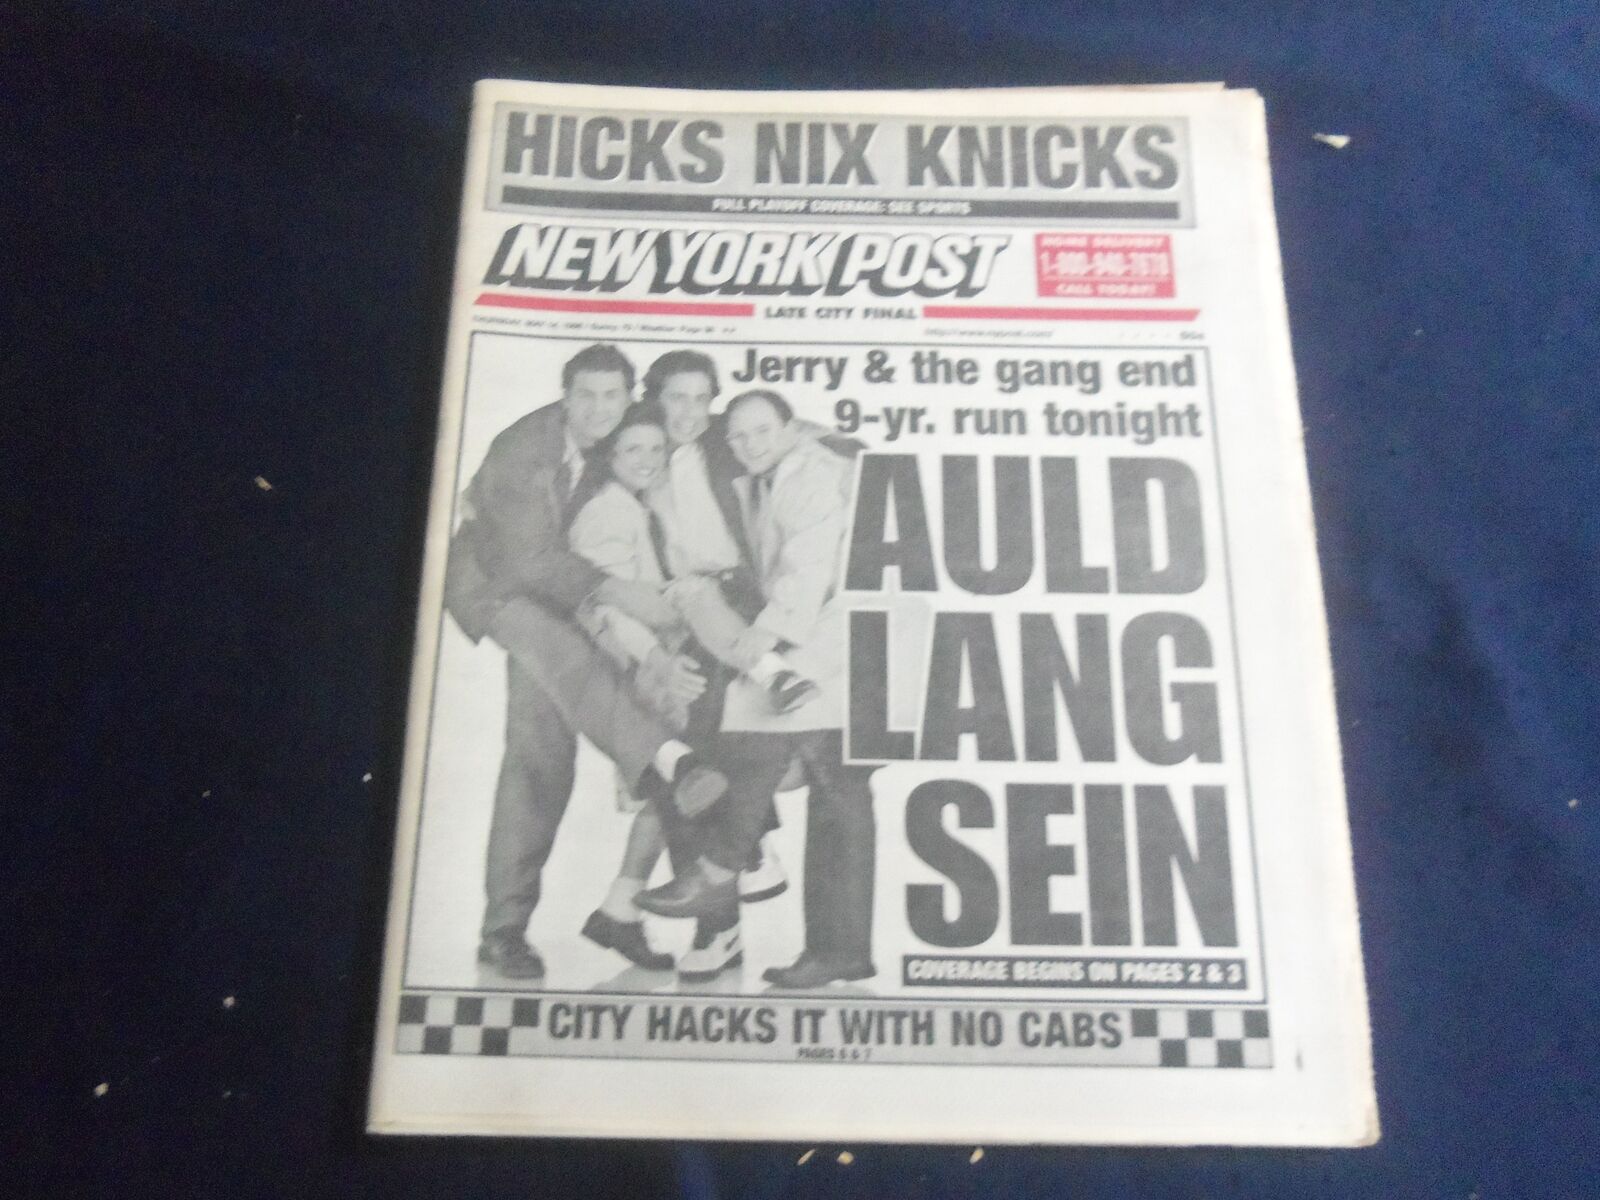 1998 MAY 14 NEW YORK POST NEWSPAPER - SEINFELD AIRS LAST TV EPISODE - NP 5660